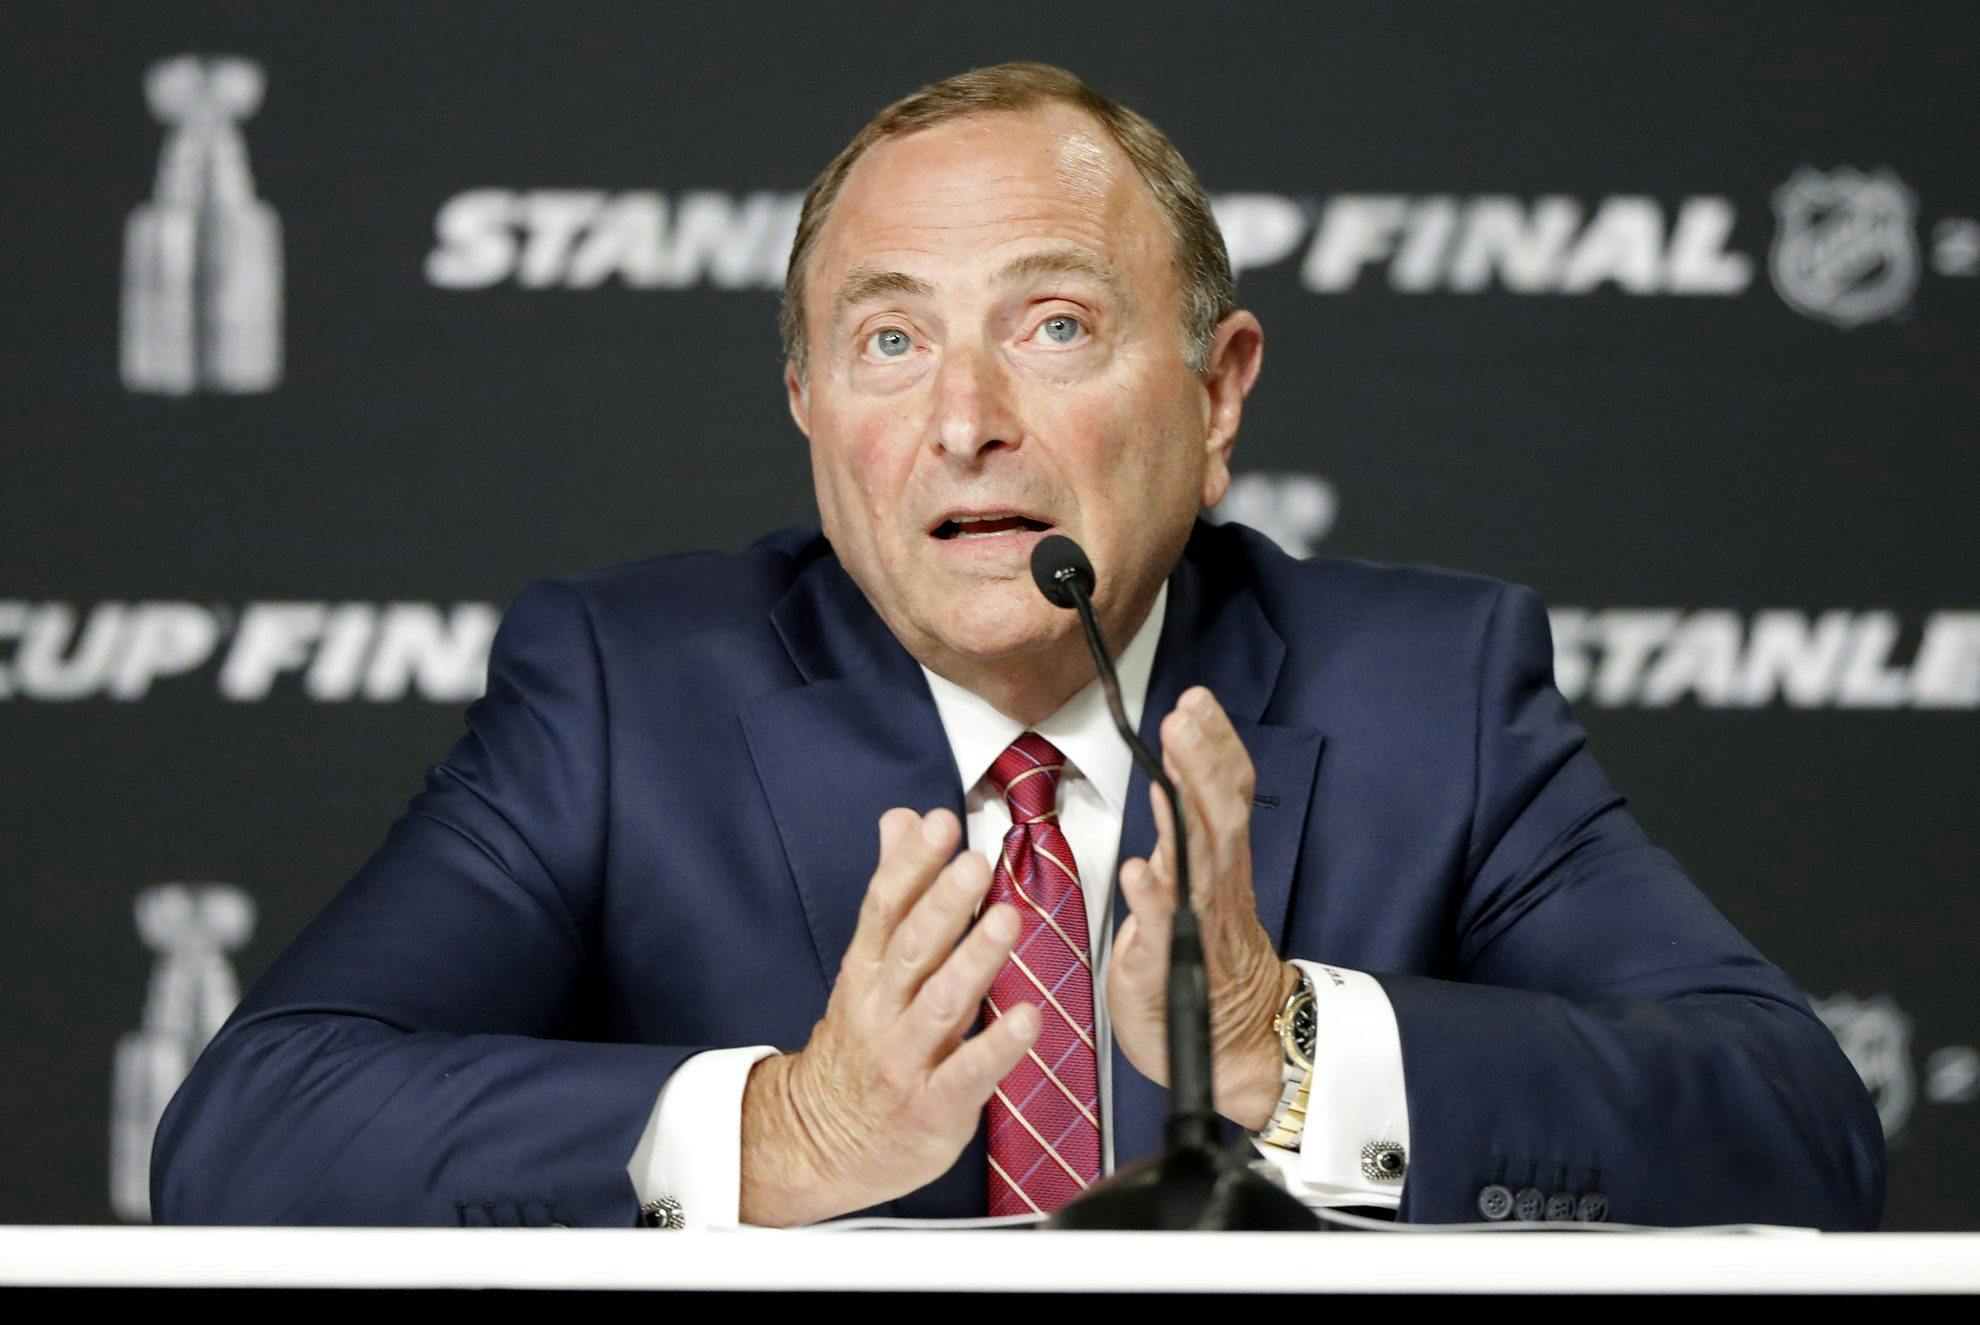 Burnside: NHL’s credibility rightfully questioned in wake of Blackhawks’ cover-up